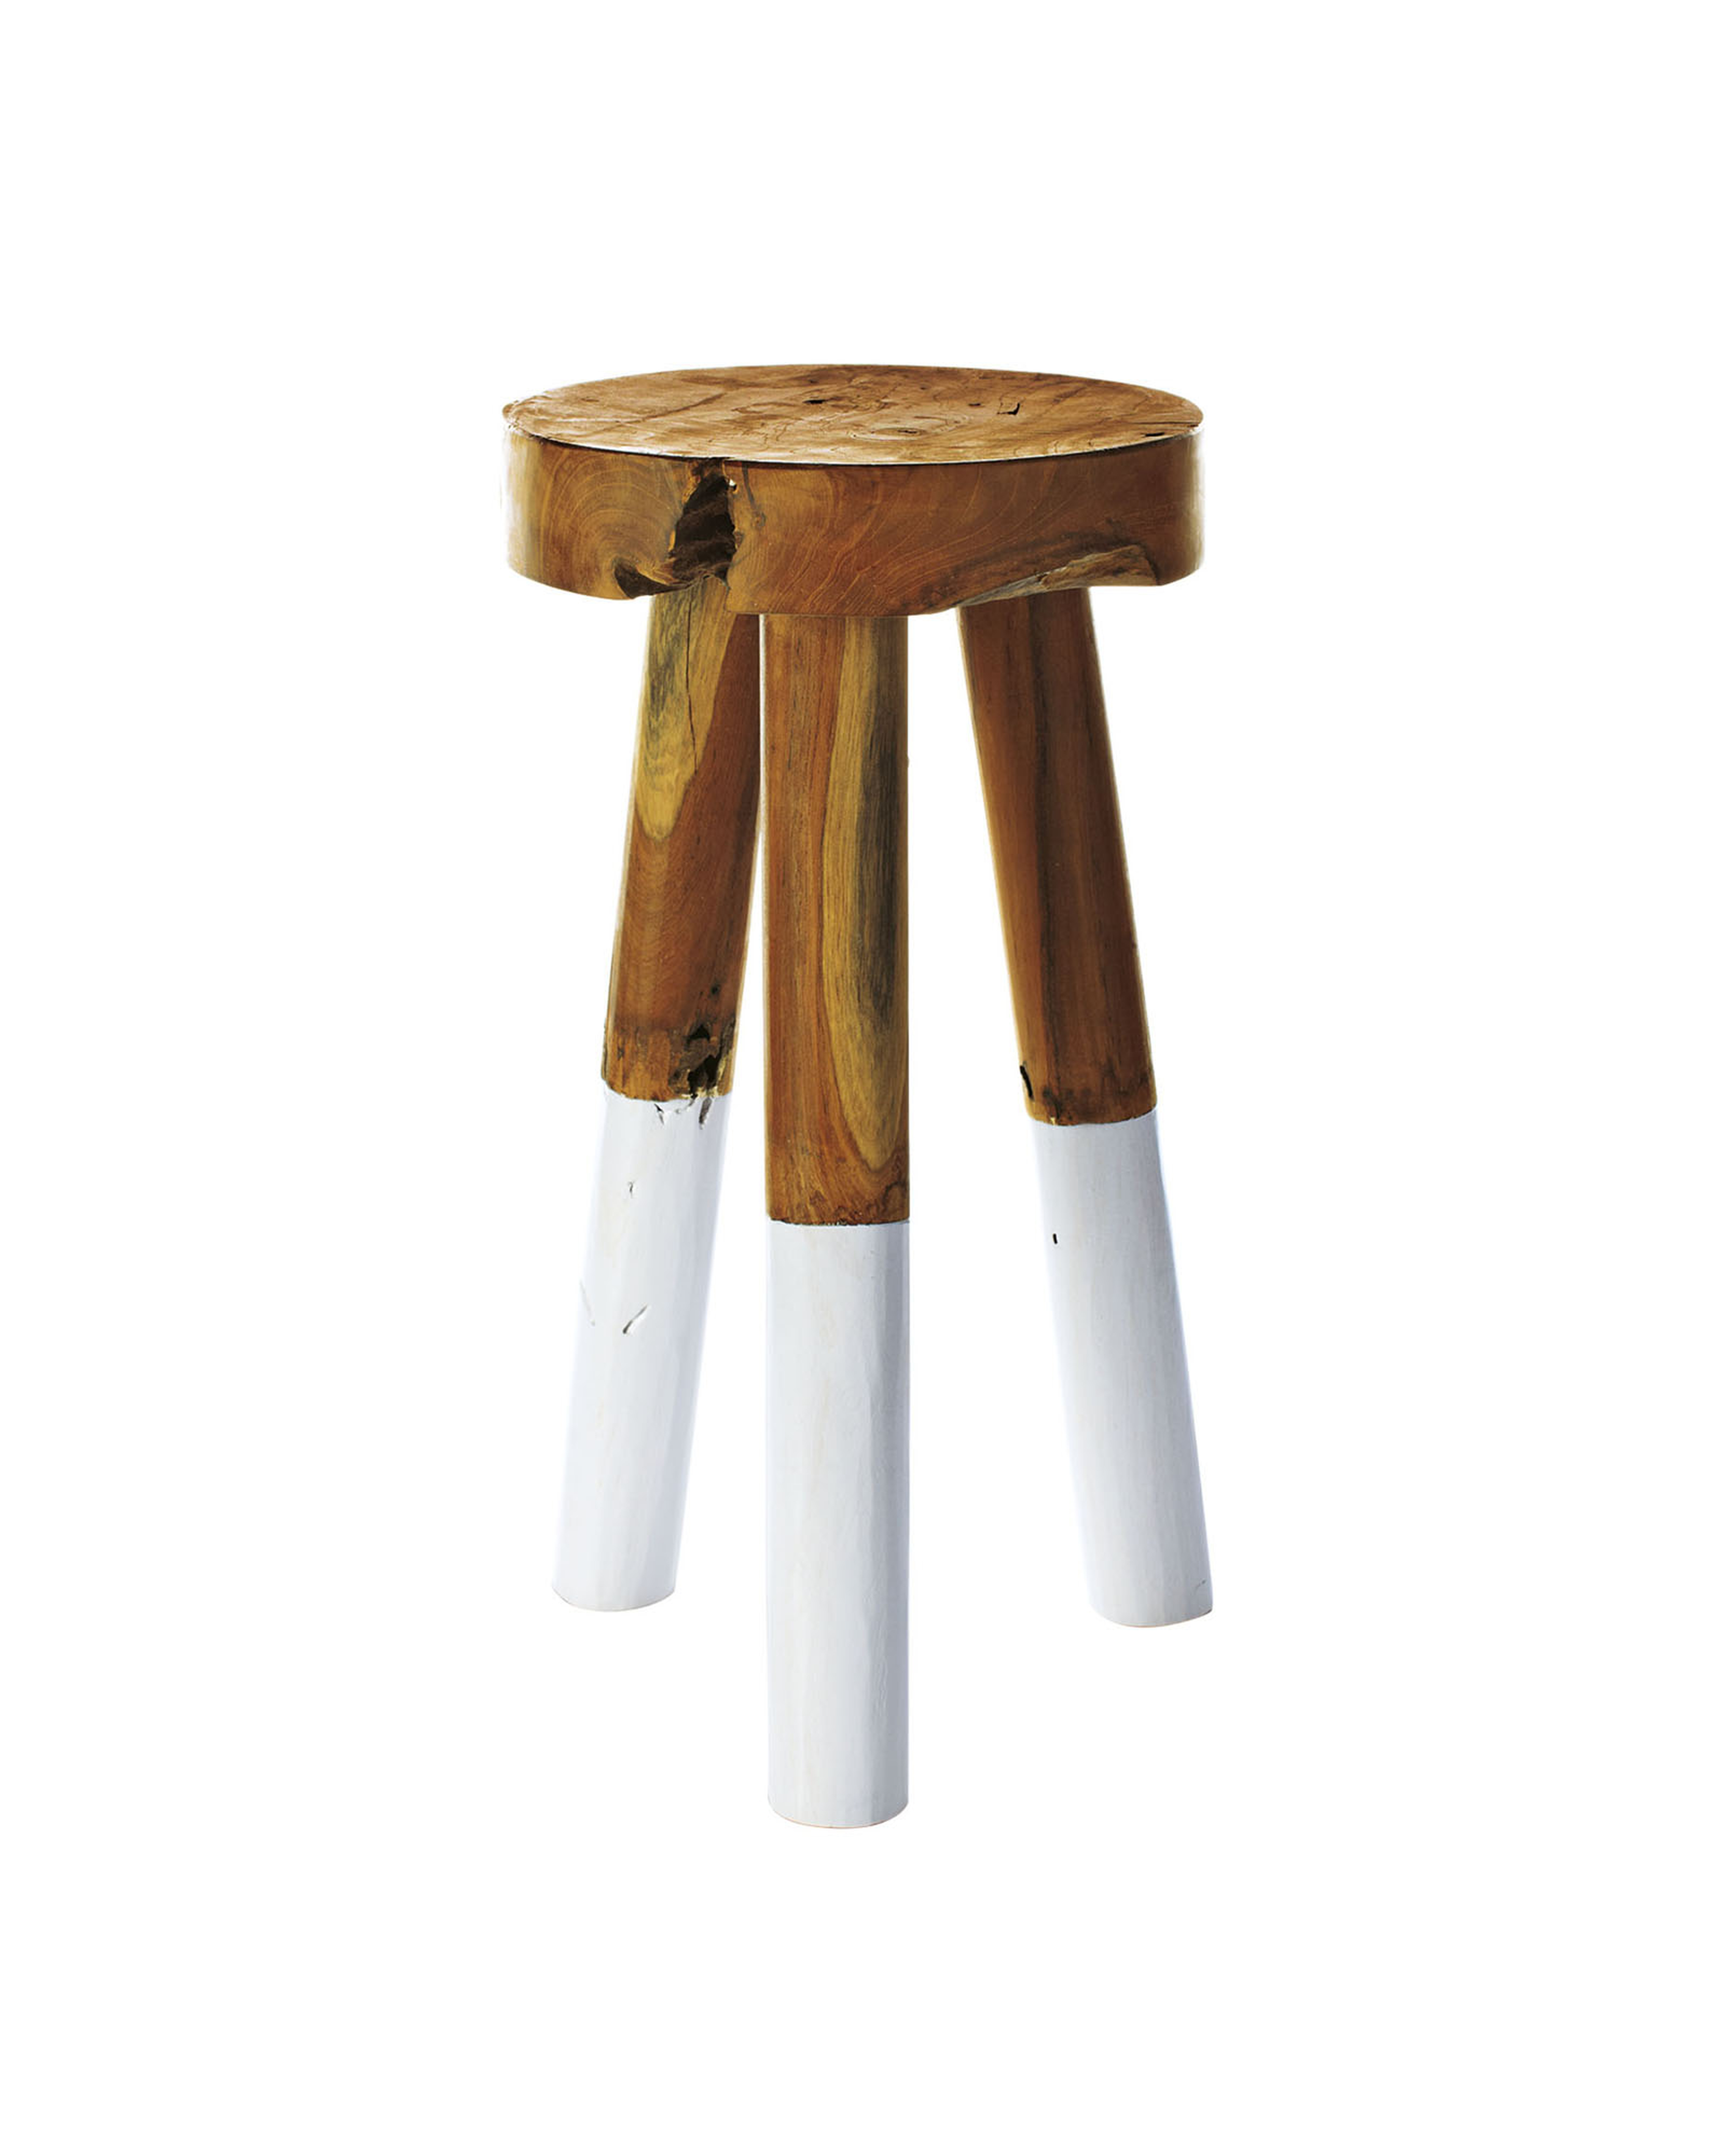 Dip-Dyed Stools - Serena and Lily